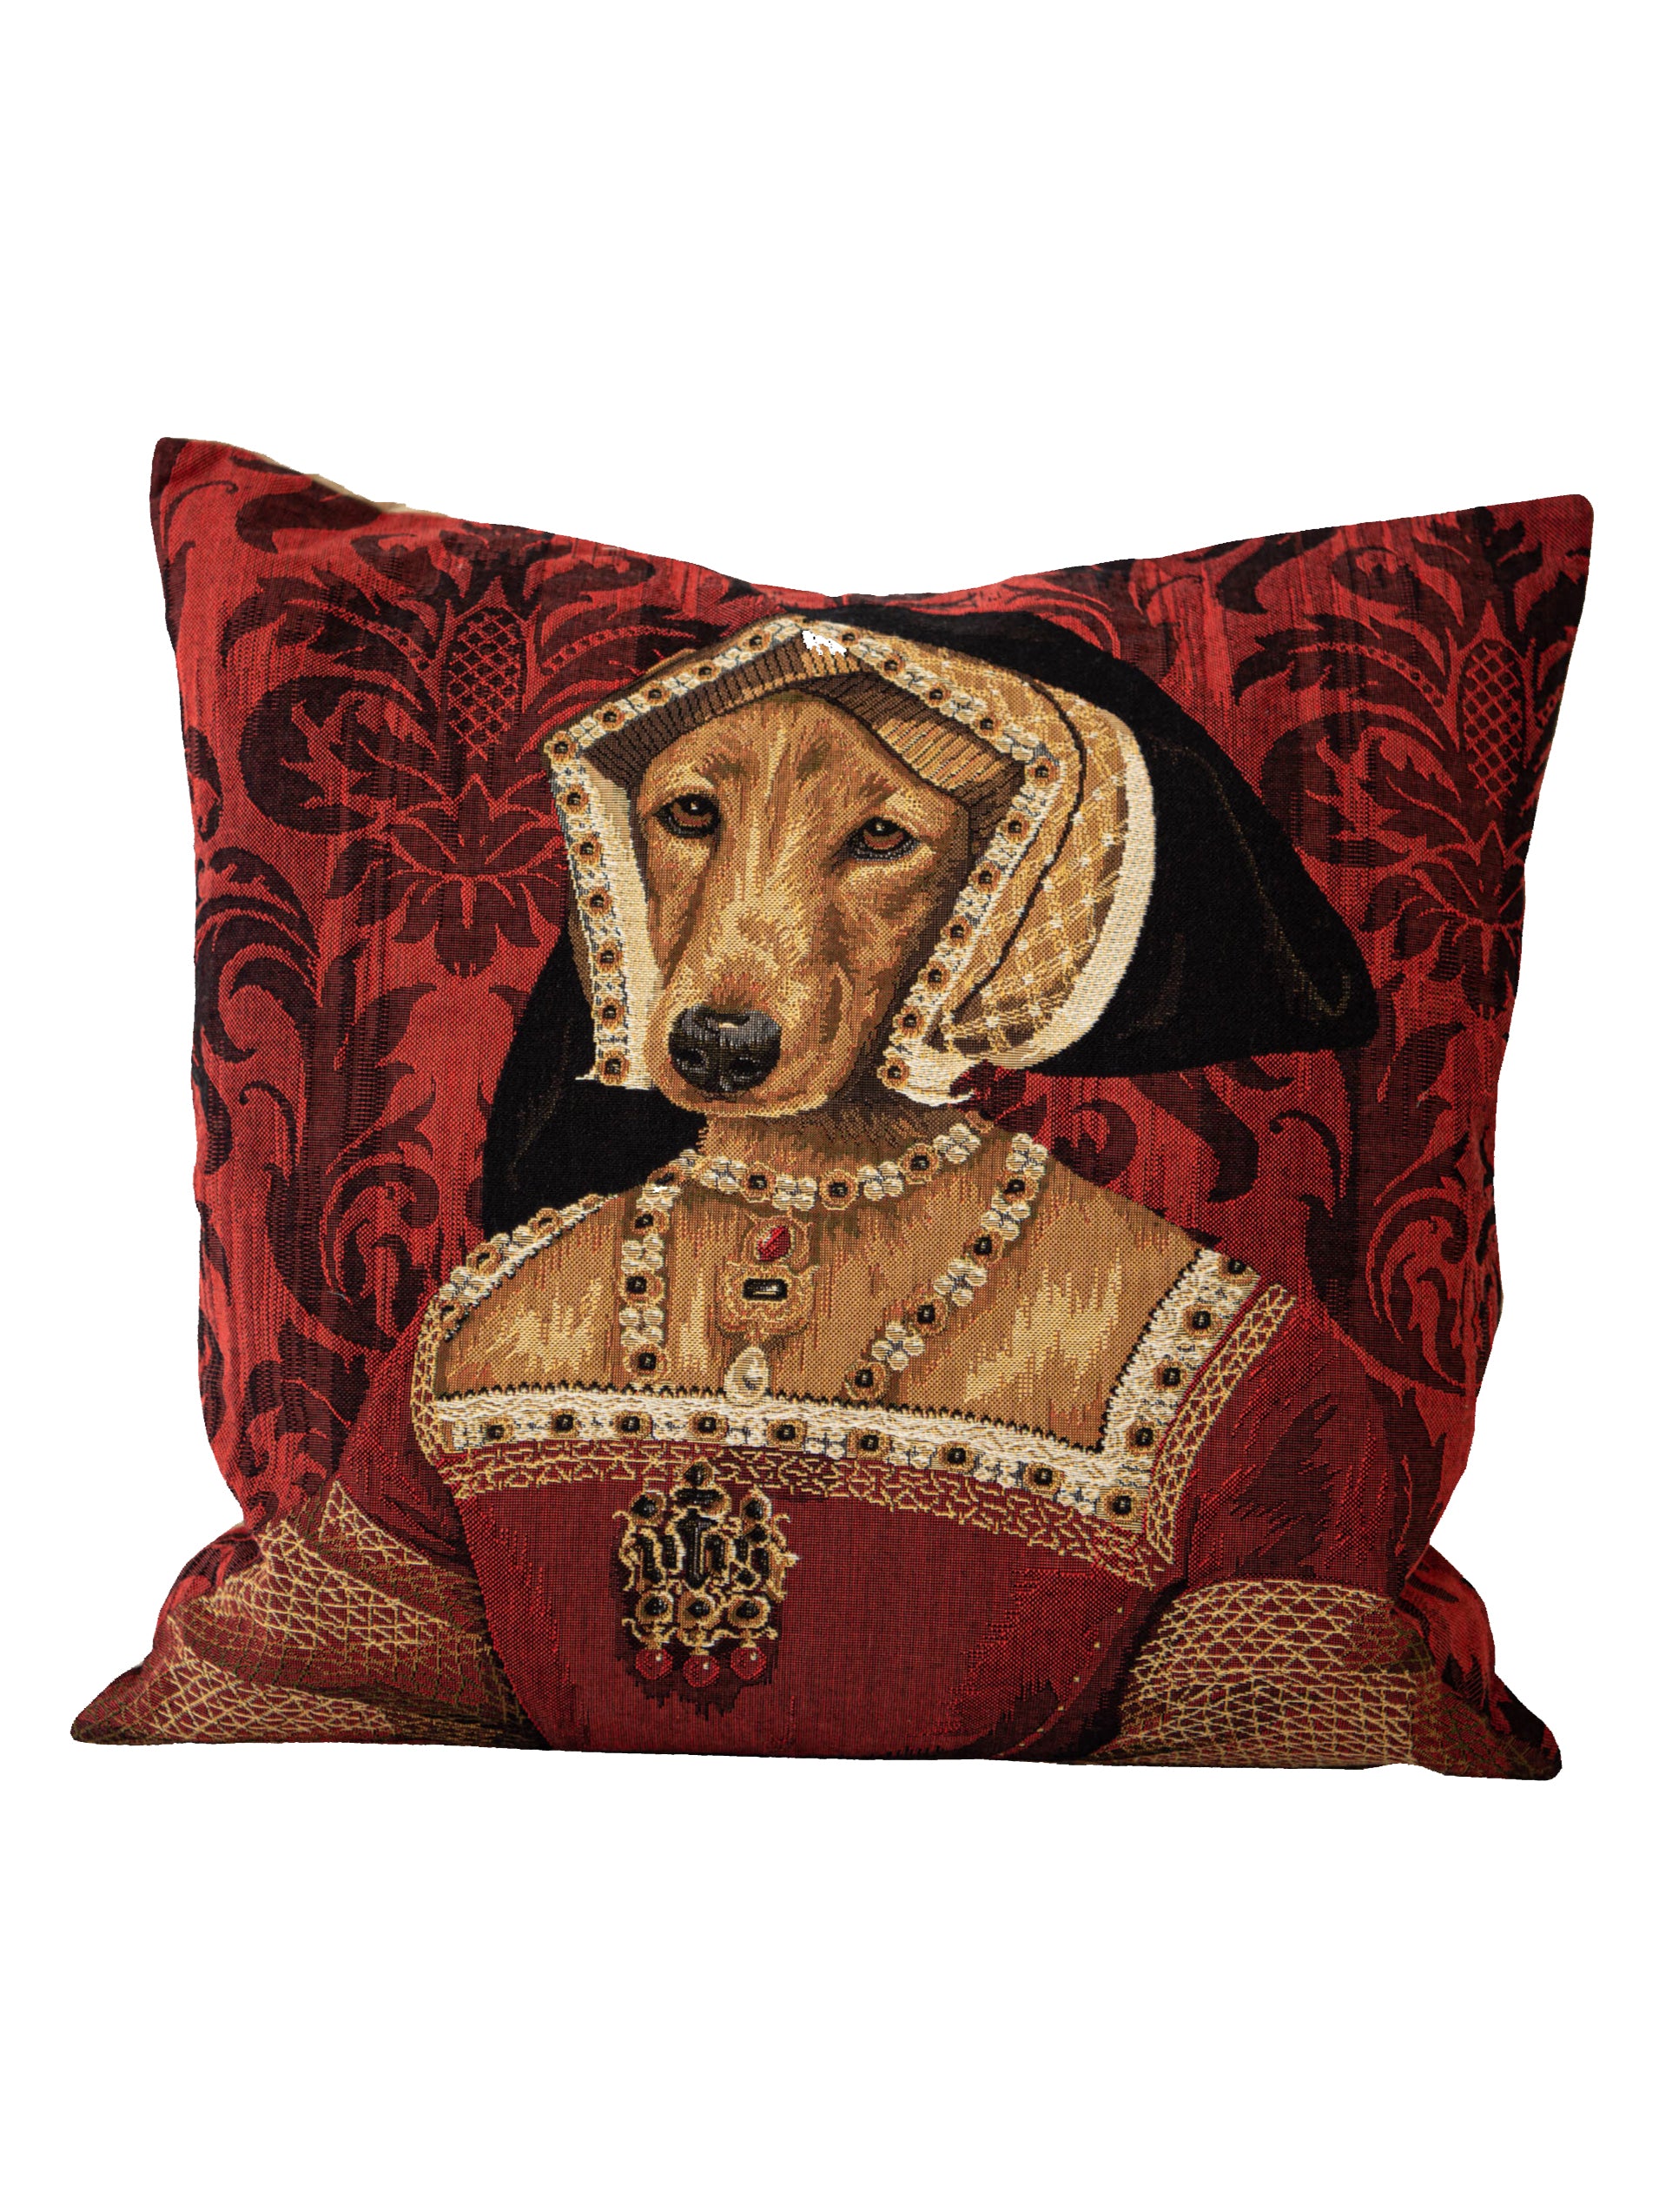 Man's Best Friend Tapestry Pillows Weston Table